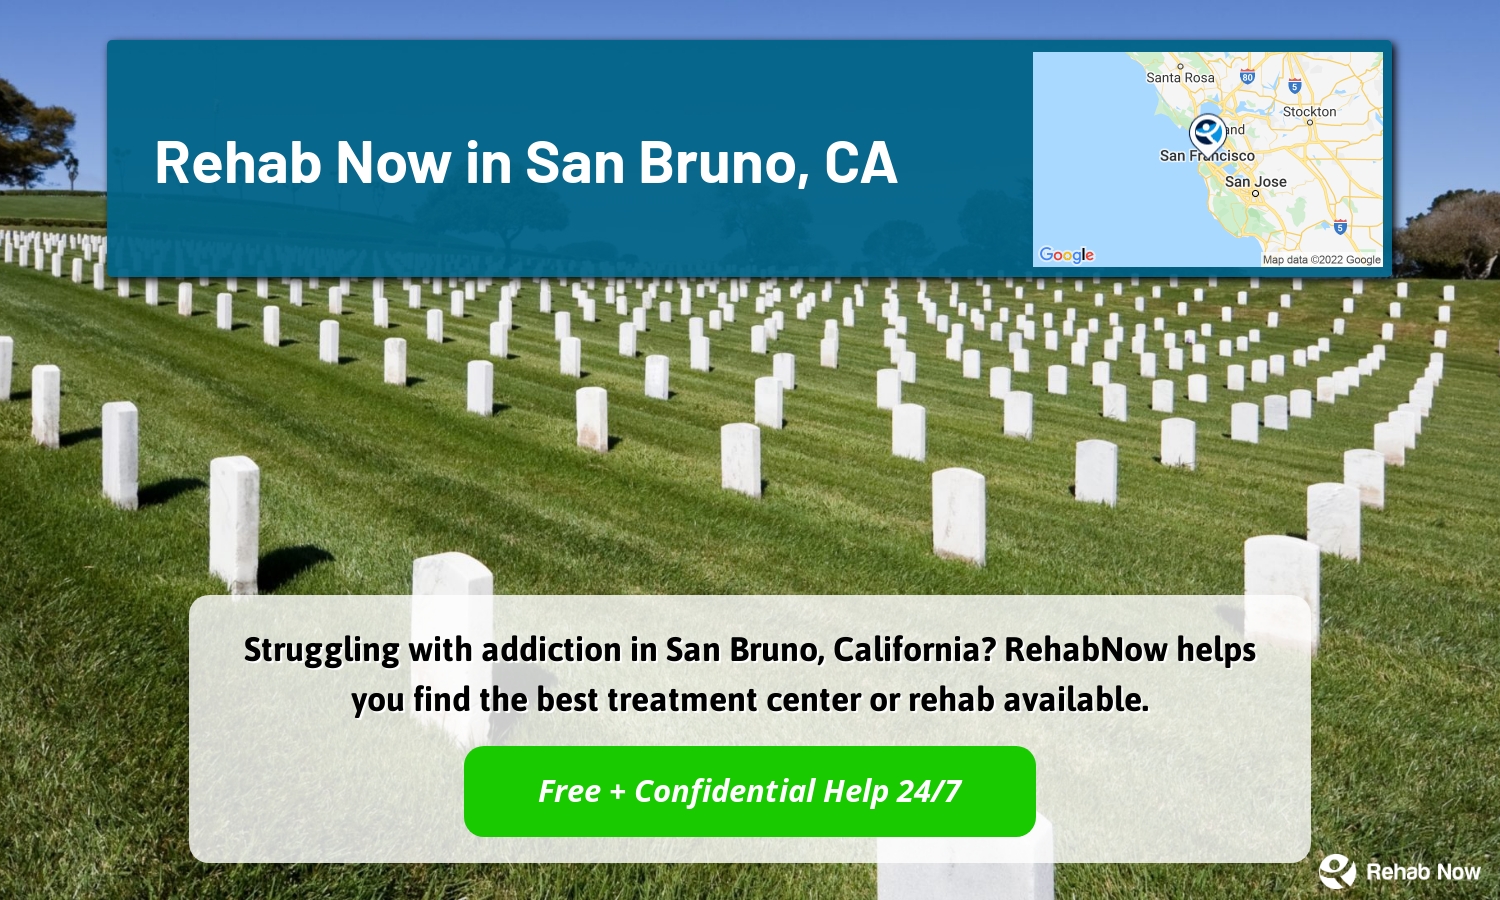 Struggling with addiction in San Bruno, California? RehabNow helps you find the best treatment center or rehab available.